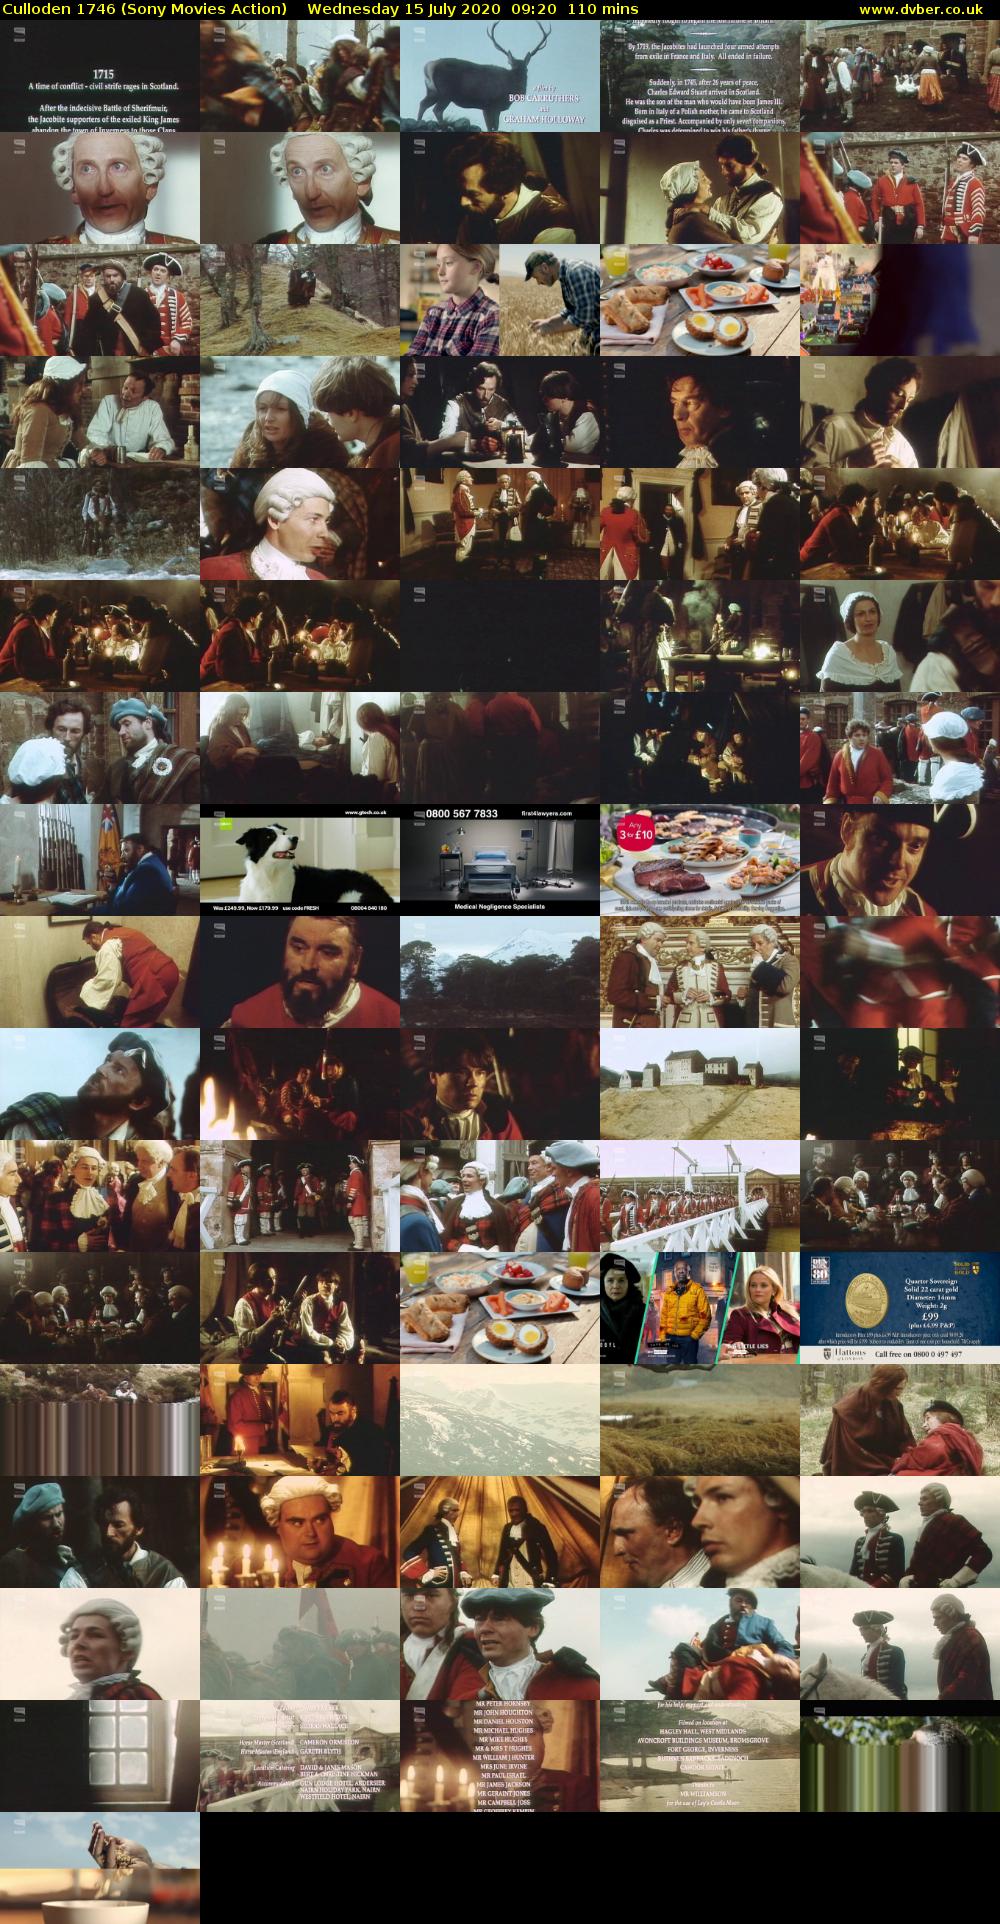 Culloden 1746 (Sony Movies Action) Wednesday 15 July 2020 09:20 - 11:10